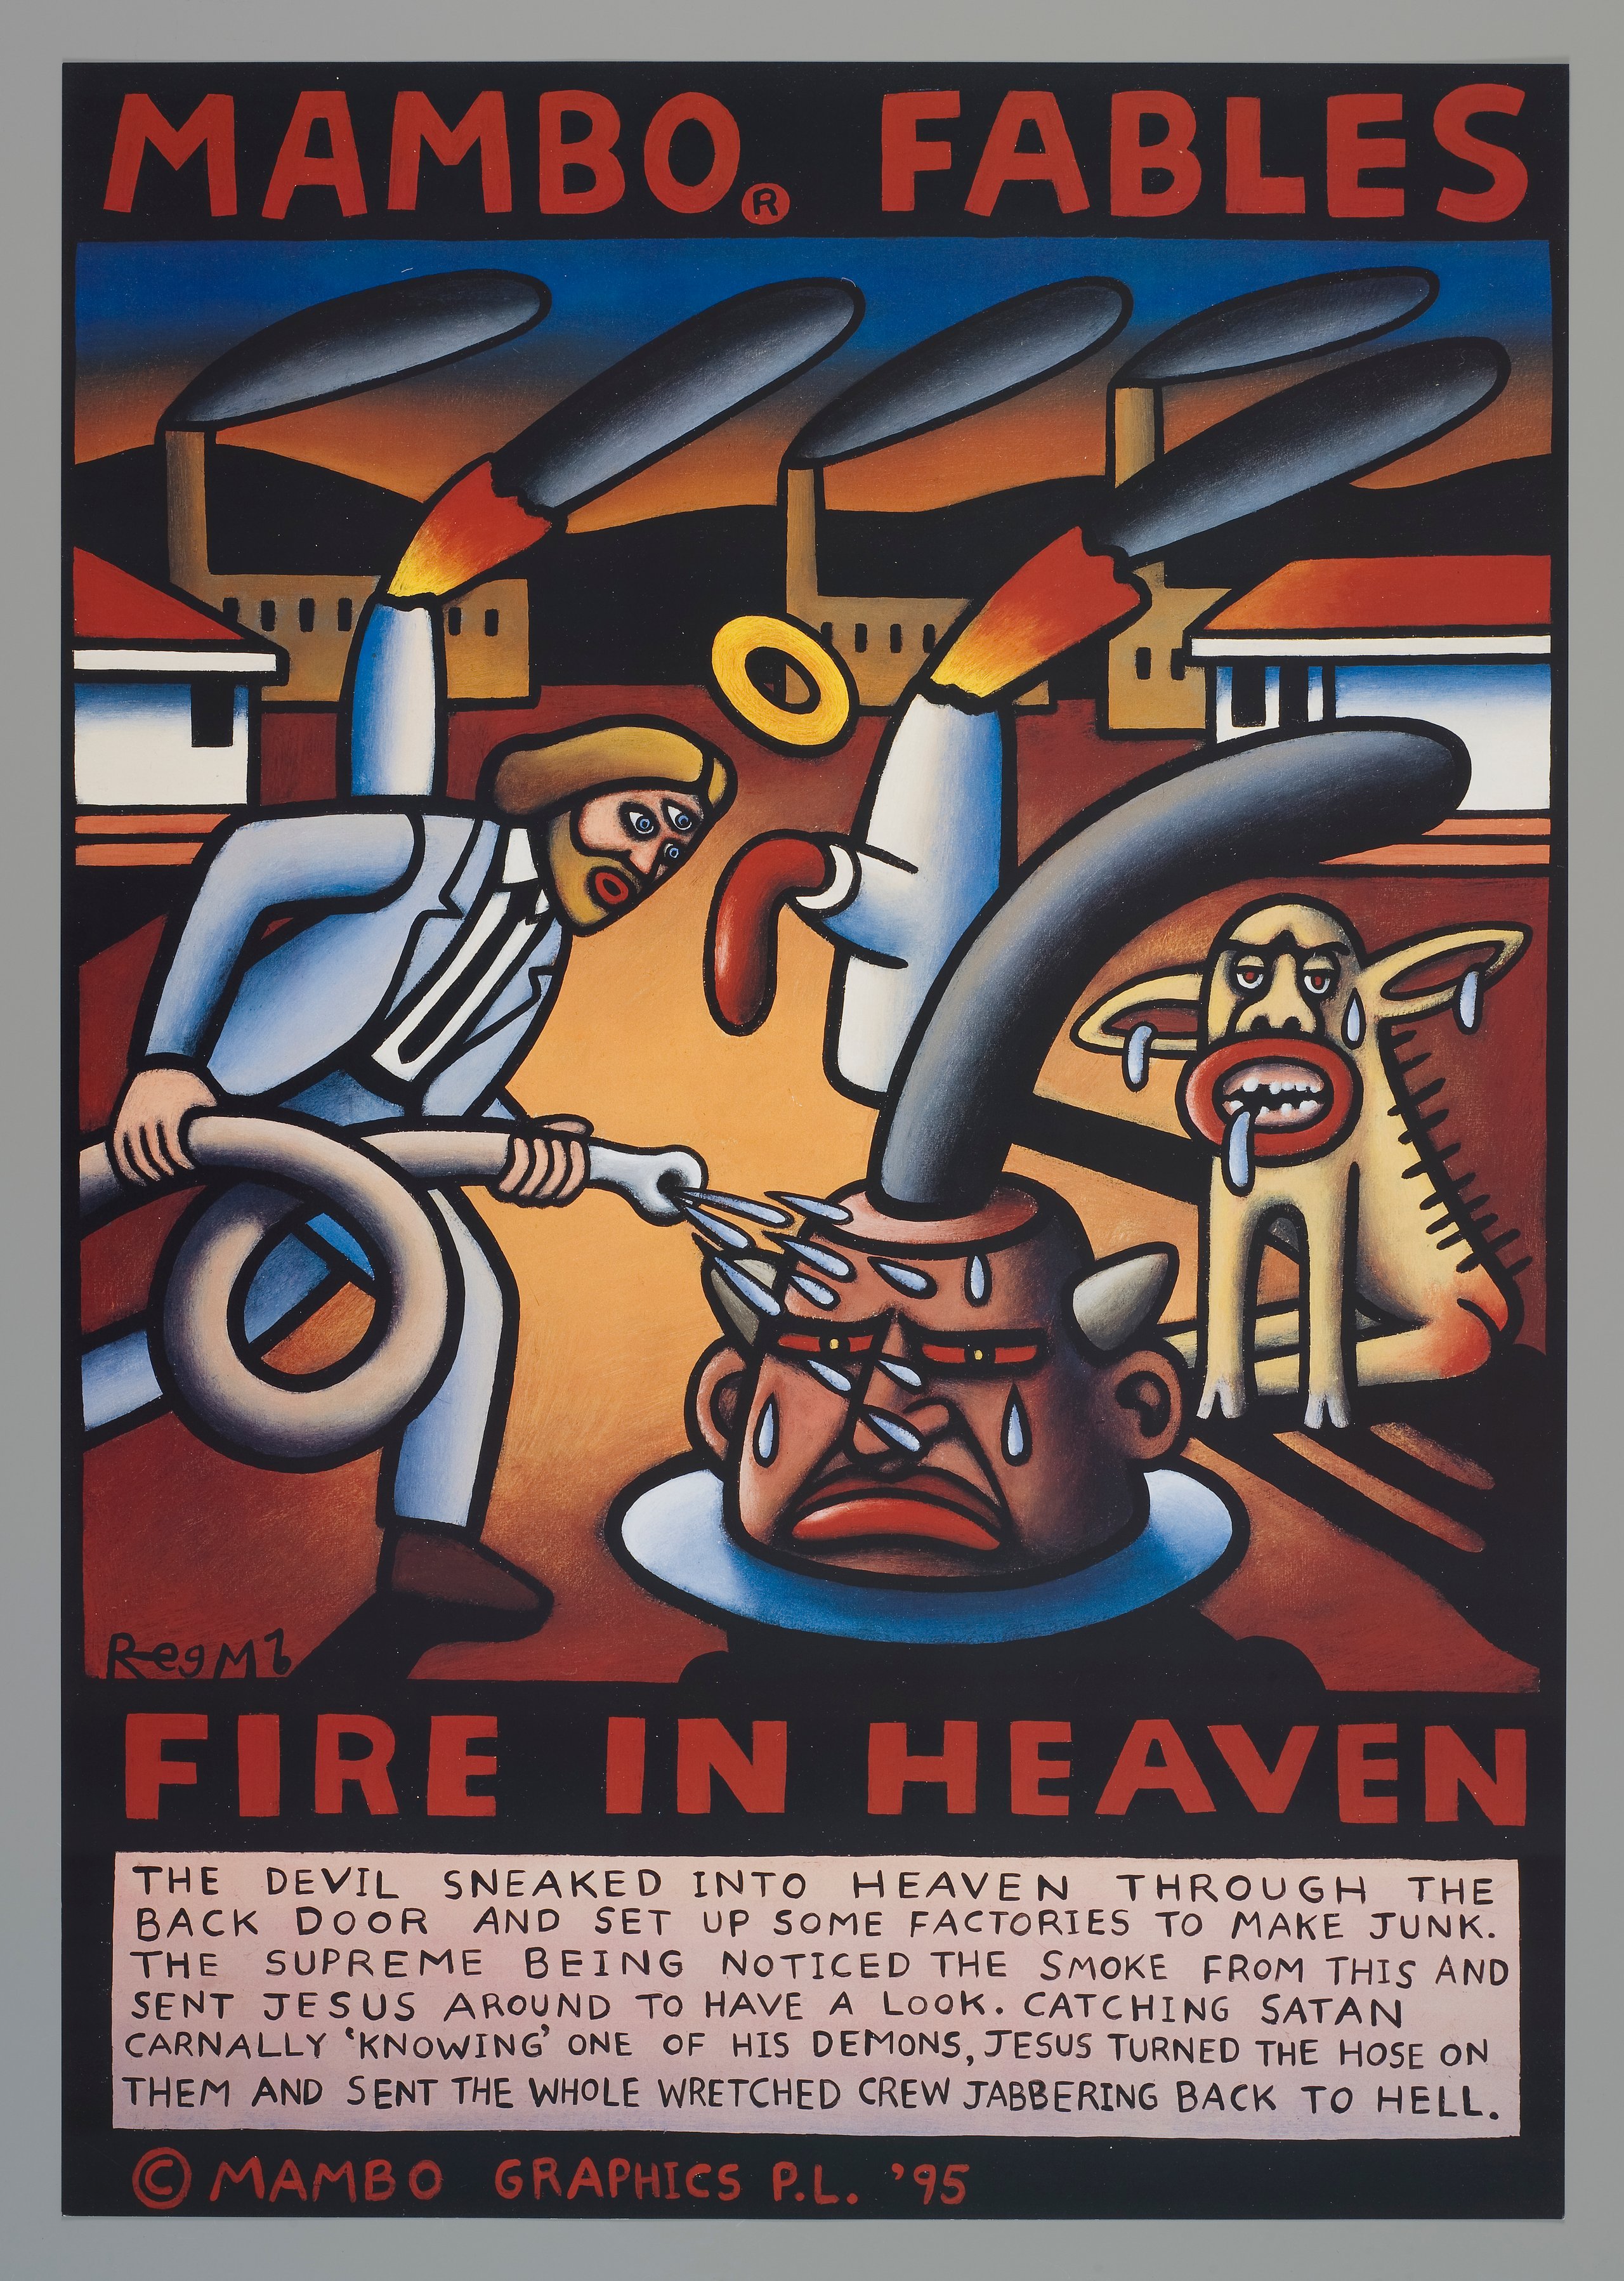 'Mambo Fables / Fire in Heaven' posters by Reg Mombassa for Mambo Graphics